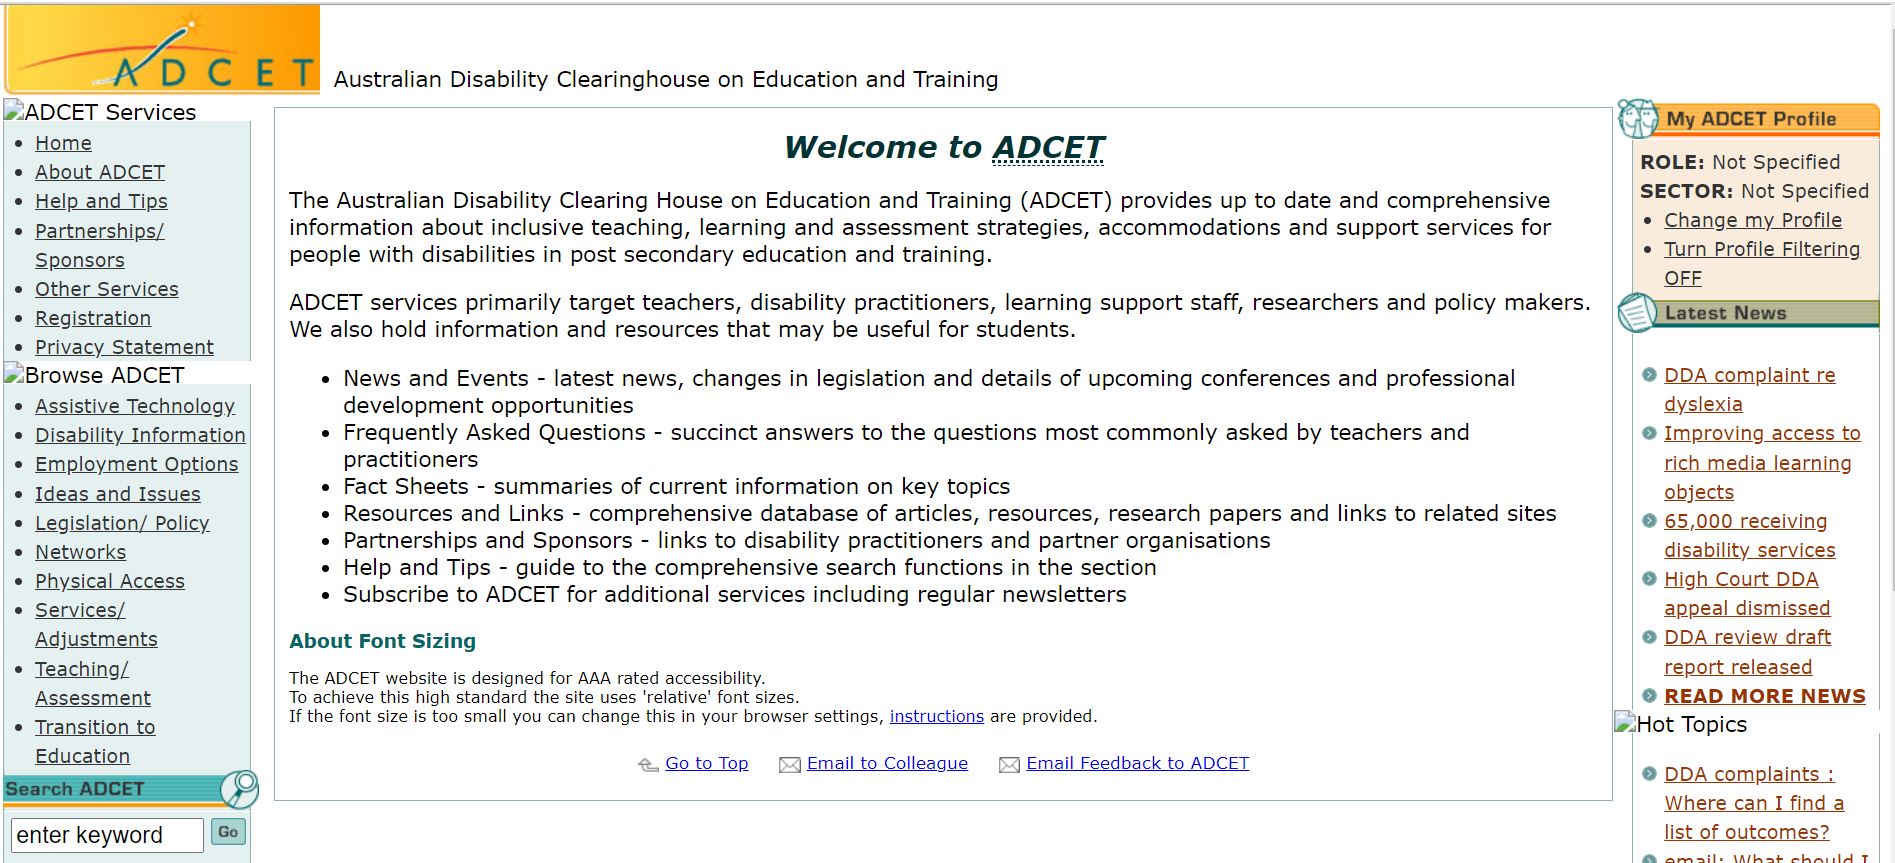 - Screen shot of webpage from 2003 showing simple multicolumn text and links. No images are displayed